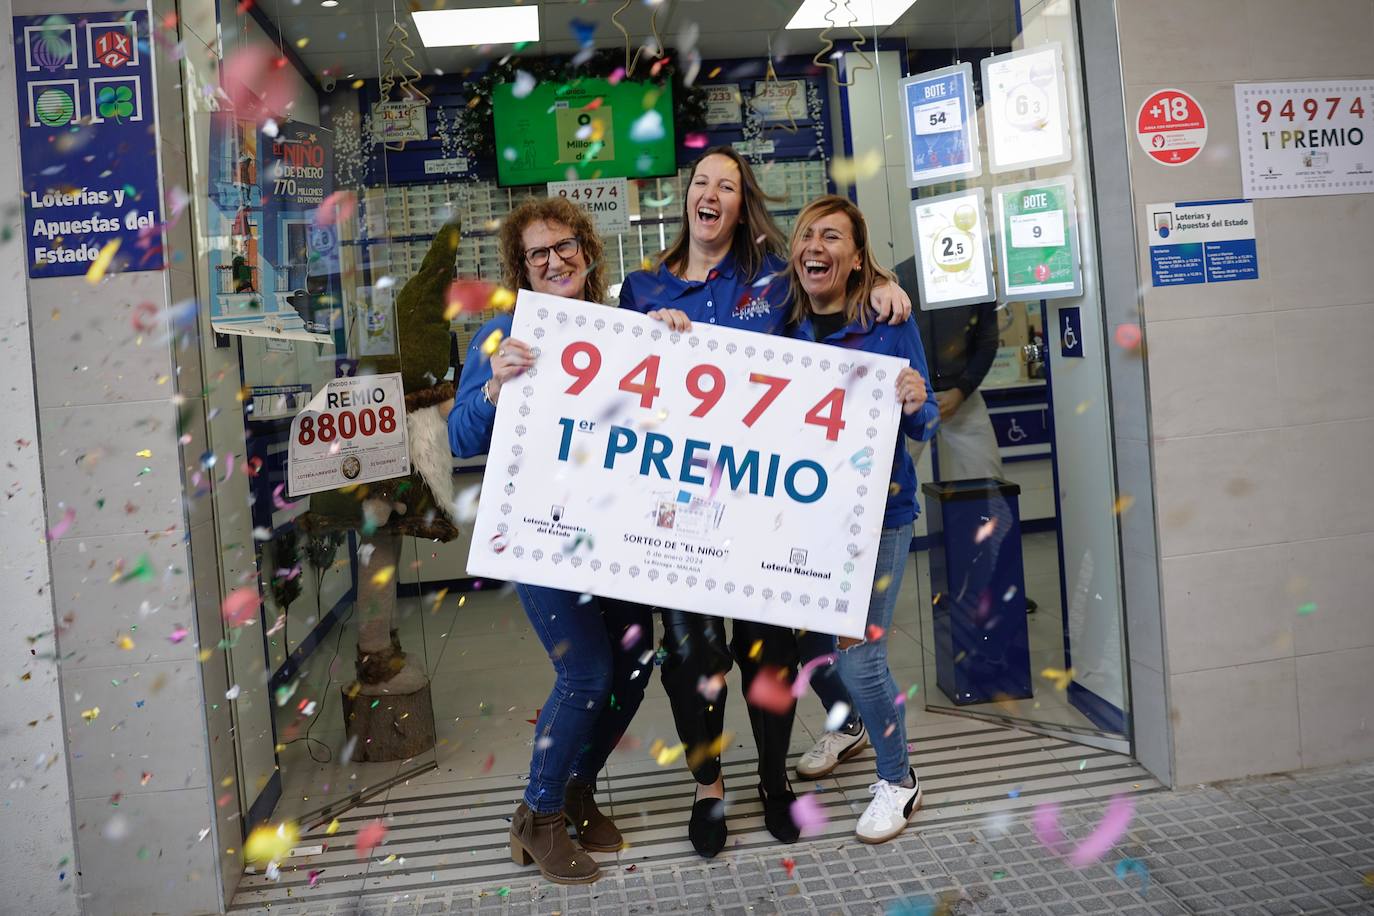 Jackpot winning tickets in Spain&#039;s El Niño lottery sold in Malaga province, and this is precisely where